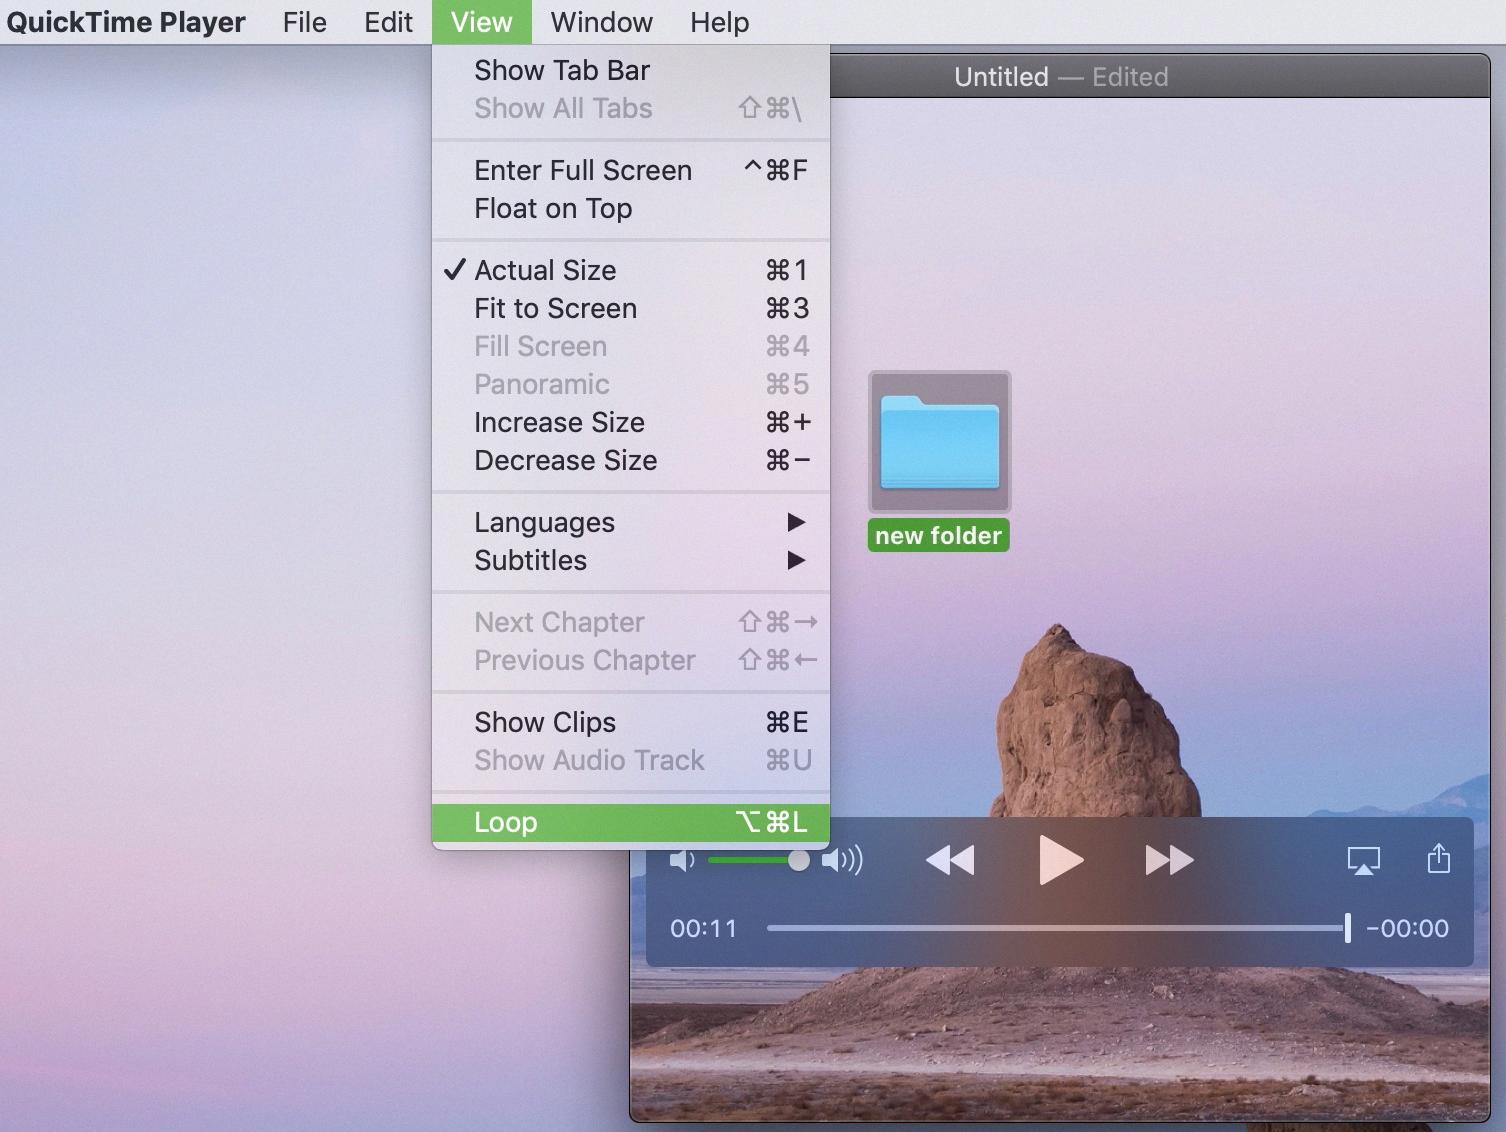 how to watch quicktime videos on mac